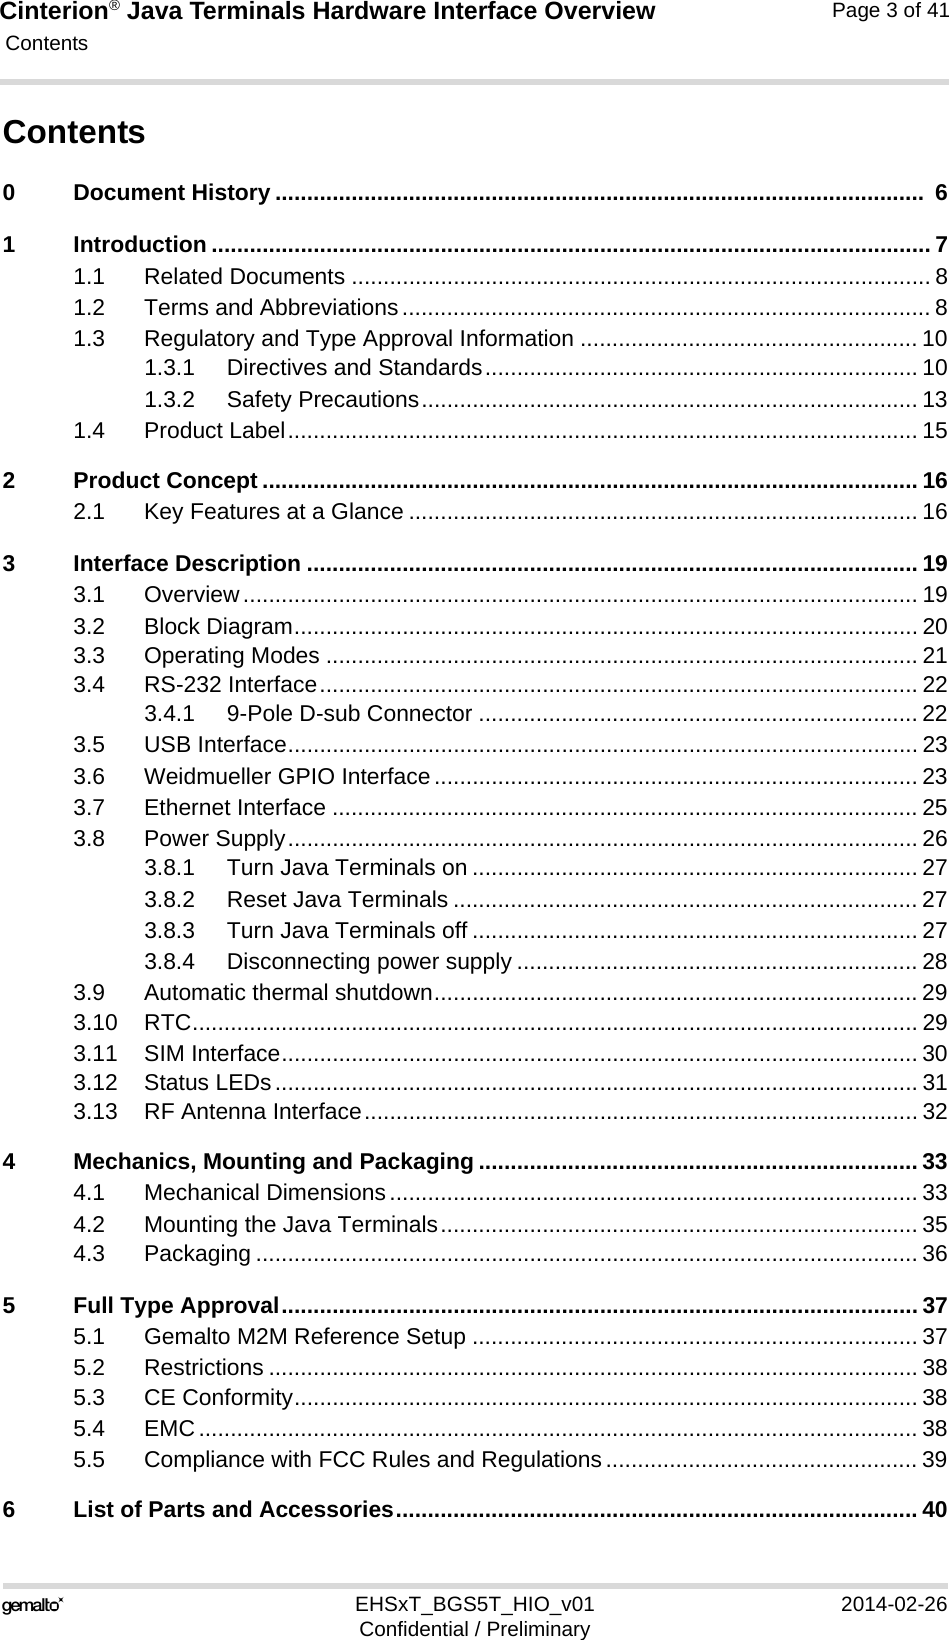 Cinterion® Java Terminals Hardware Interface Overview Contents112EHSxT_BGS5T_HIO_v01 2014-02-26Confidential / PreliminaryPage 3 of 41Contents0 Document History ......................................................................................................  61 Introduction ................................................................................................................. 71.1 Related Documents ........................................................................................... 81.2 Terms and Abbreviations................................................................................... 81.3 Regulatory and Type Approval Information ..................................................... 101.3.1 Directives and Standards.................................................................... 101.3.2 Safety Precautions.............................................................................. 131.4 Product Label................................................................................................... 152 Product Concept ....................................................................................................... 162.1 Key Features at a Glance ................................................................................ 163 Interface Description ................................................................................................ 193.1 Overview.......................................................................................................... 193.2 Block Diagram.................................................................................................. 203.3 Operating Modes ............................................................................................. 213.4 RS-232 Interface.............................................................................................. 223.4.1 9-Pole D-sub Connector ..................................................................... 223.5 USB Interface................................................................................................... 233.6 Weidmueller GPIO Interface............................................................................ 233.7 Ethernet Interface ............................................................................................ 253.8 Power Supply................................................................................................... 263.8.1 Turn Java Terminals on ...................................................................... 273.8.2 Reset Java Terminals ......................................................................... 273.8.3 Turn Java Terminals off ...................................................................... 273.8.4 Disconnecting power supply ............................................................... 283.9 Automatic thermal shutdown............................................................................ 293.10 RTC.................................................................................................................. 293.11 SIM Interface.................................................................................................... 303.12 Status LEDs..................................................................................................... 313.13 RF Antenna Interface....................................................................................... 324 Mechanics, Mounting and Packaging ..................................................................... 334.1 Mechanical Dimensions................................................................................... 334.2 Mounting the Java Terminals........................................................................... 354.3 Packaging ........................................................................................................ 365 Full Type Approval.................................................................................................... 375.1 Gemalto M2M Reference Setup ...................................................................... 375.2 Restrictions ...................................................................................................... 385.3 CE Conformity.................................................................................................. 385.4 EMC................................................................................................................. 385.5 Compliance with FCC Rules and Regulations................................................. 396 List of Parts and Accessories.................................................................................. 40